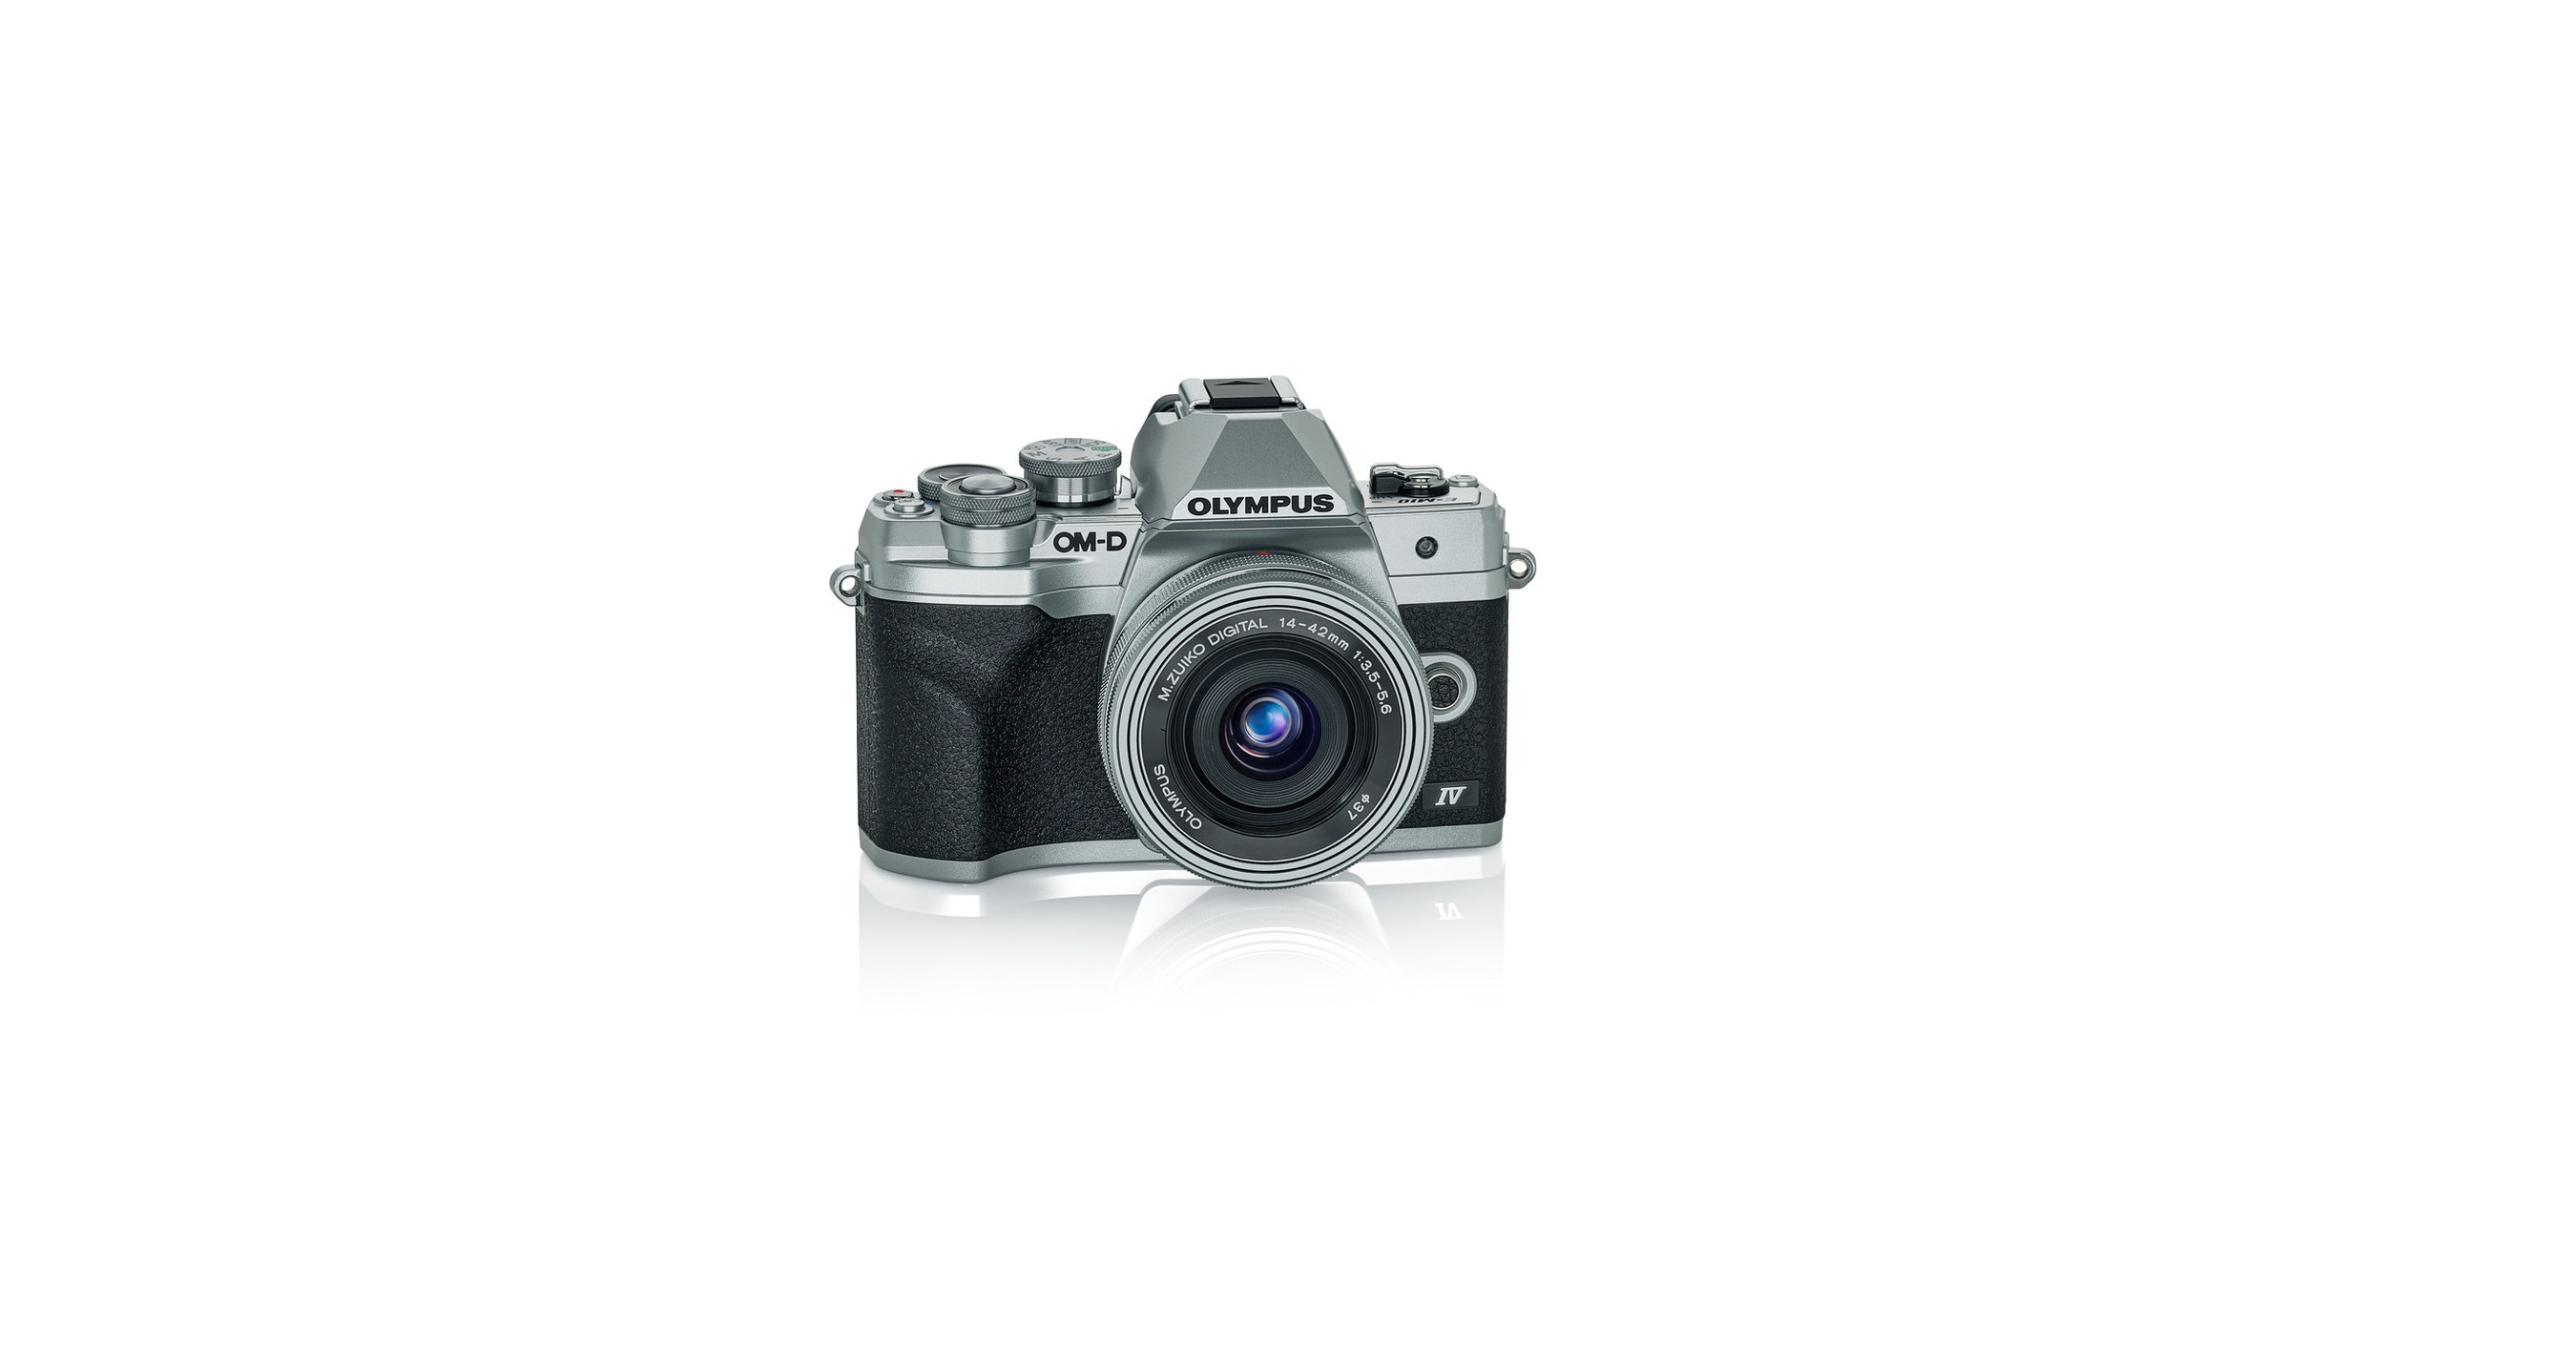 Olympus unveils the OM-D E-M10 Mark IV: We have gallery images